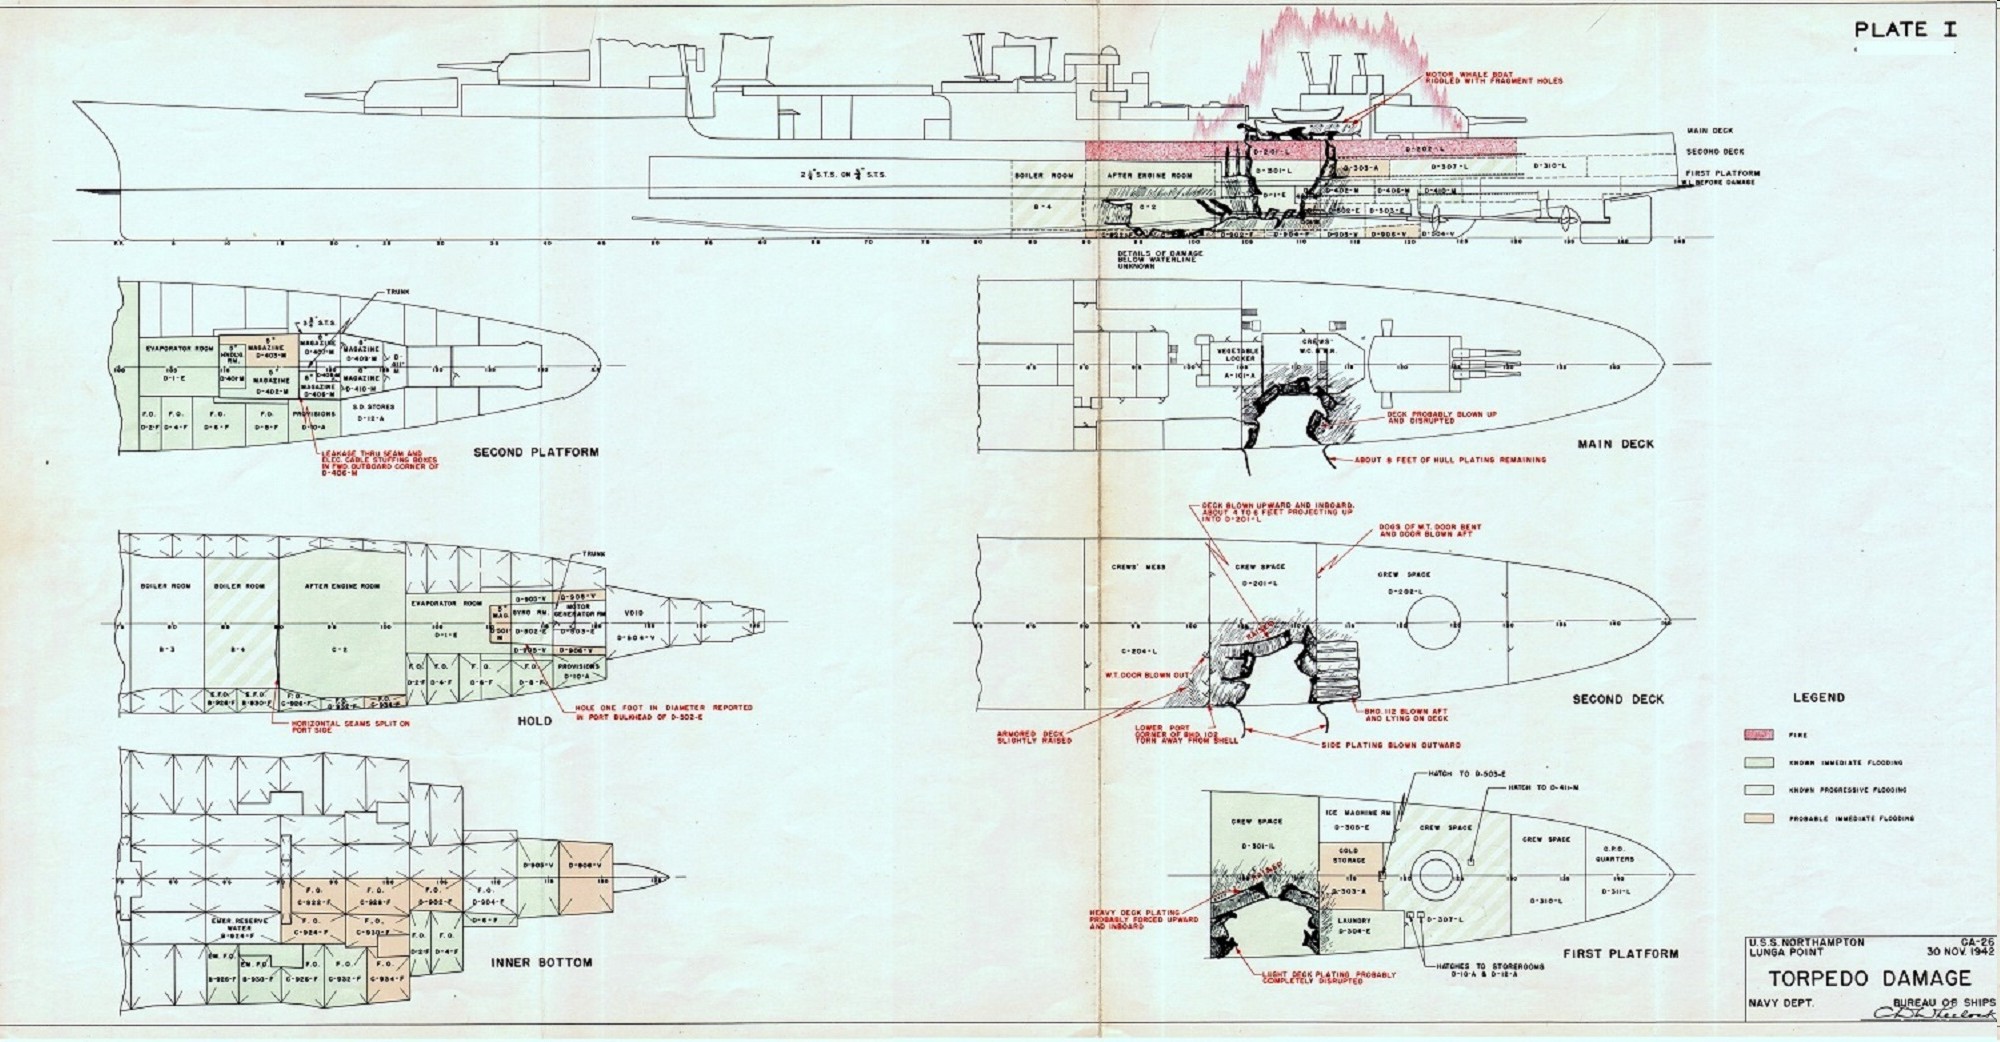 Diagram of torpedo damage to USS Northampton sustained in the Battle of Tassafaronga that caused the ship to sink.